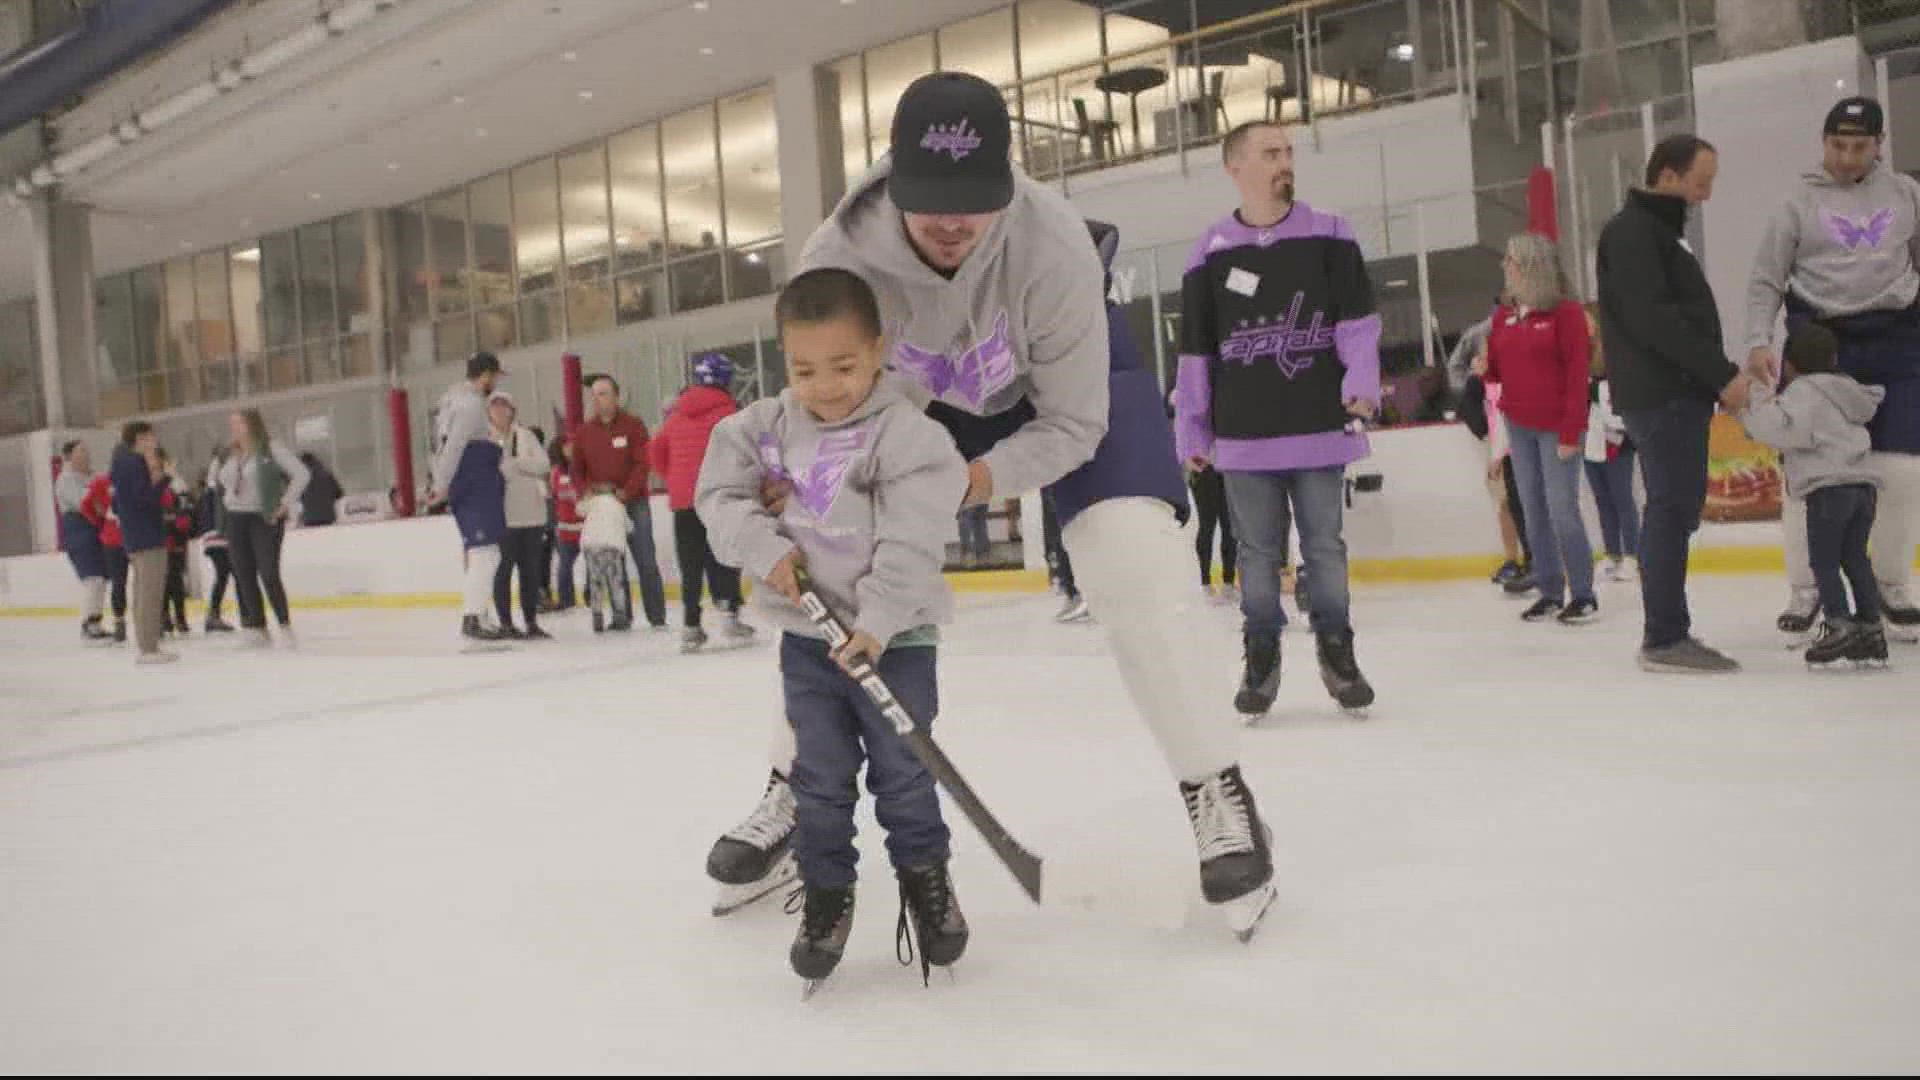 The Washington Capitals hosted a Hockey Fights Cancer skate with children and families from Leukemia & Lymphoma Society’s Mid-Atlantic Region, Make-A-Wish Mid-Atlant